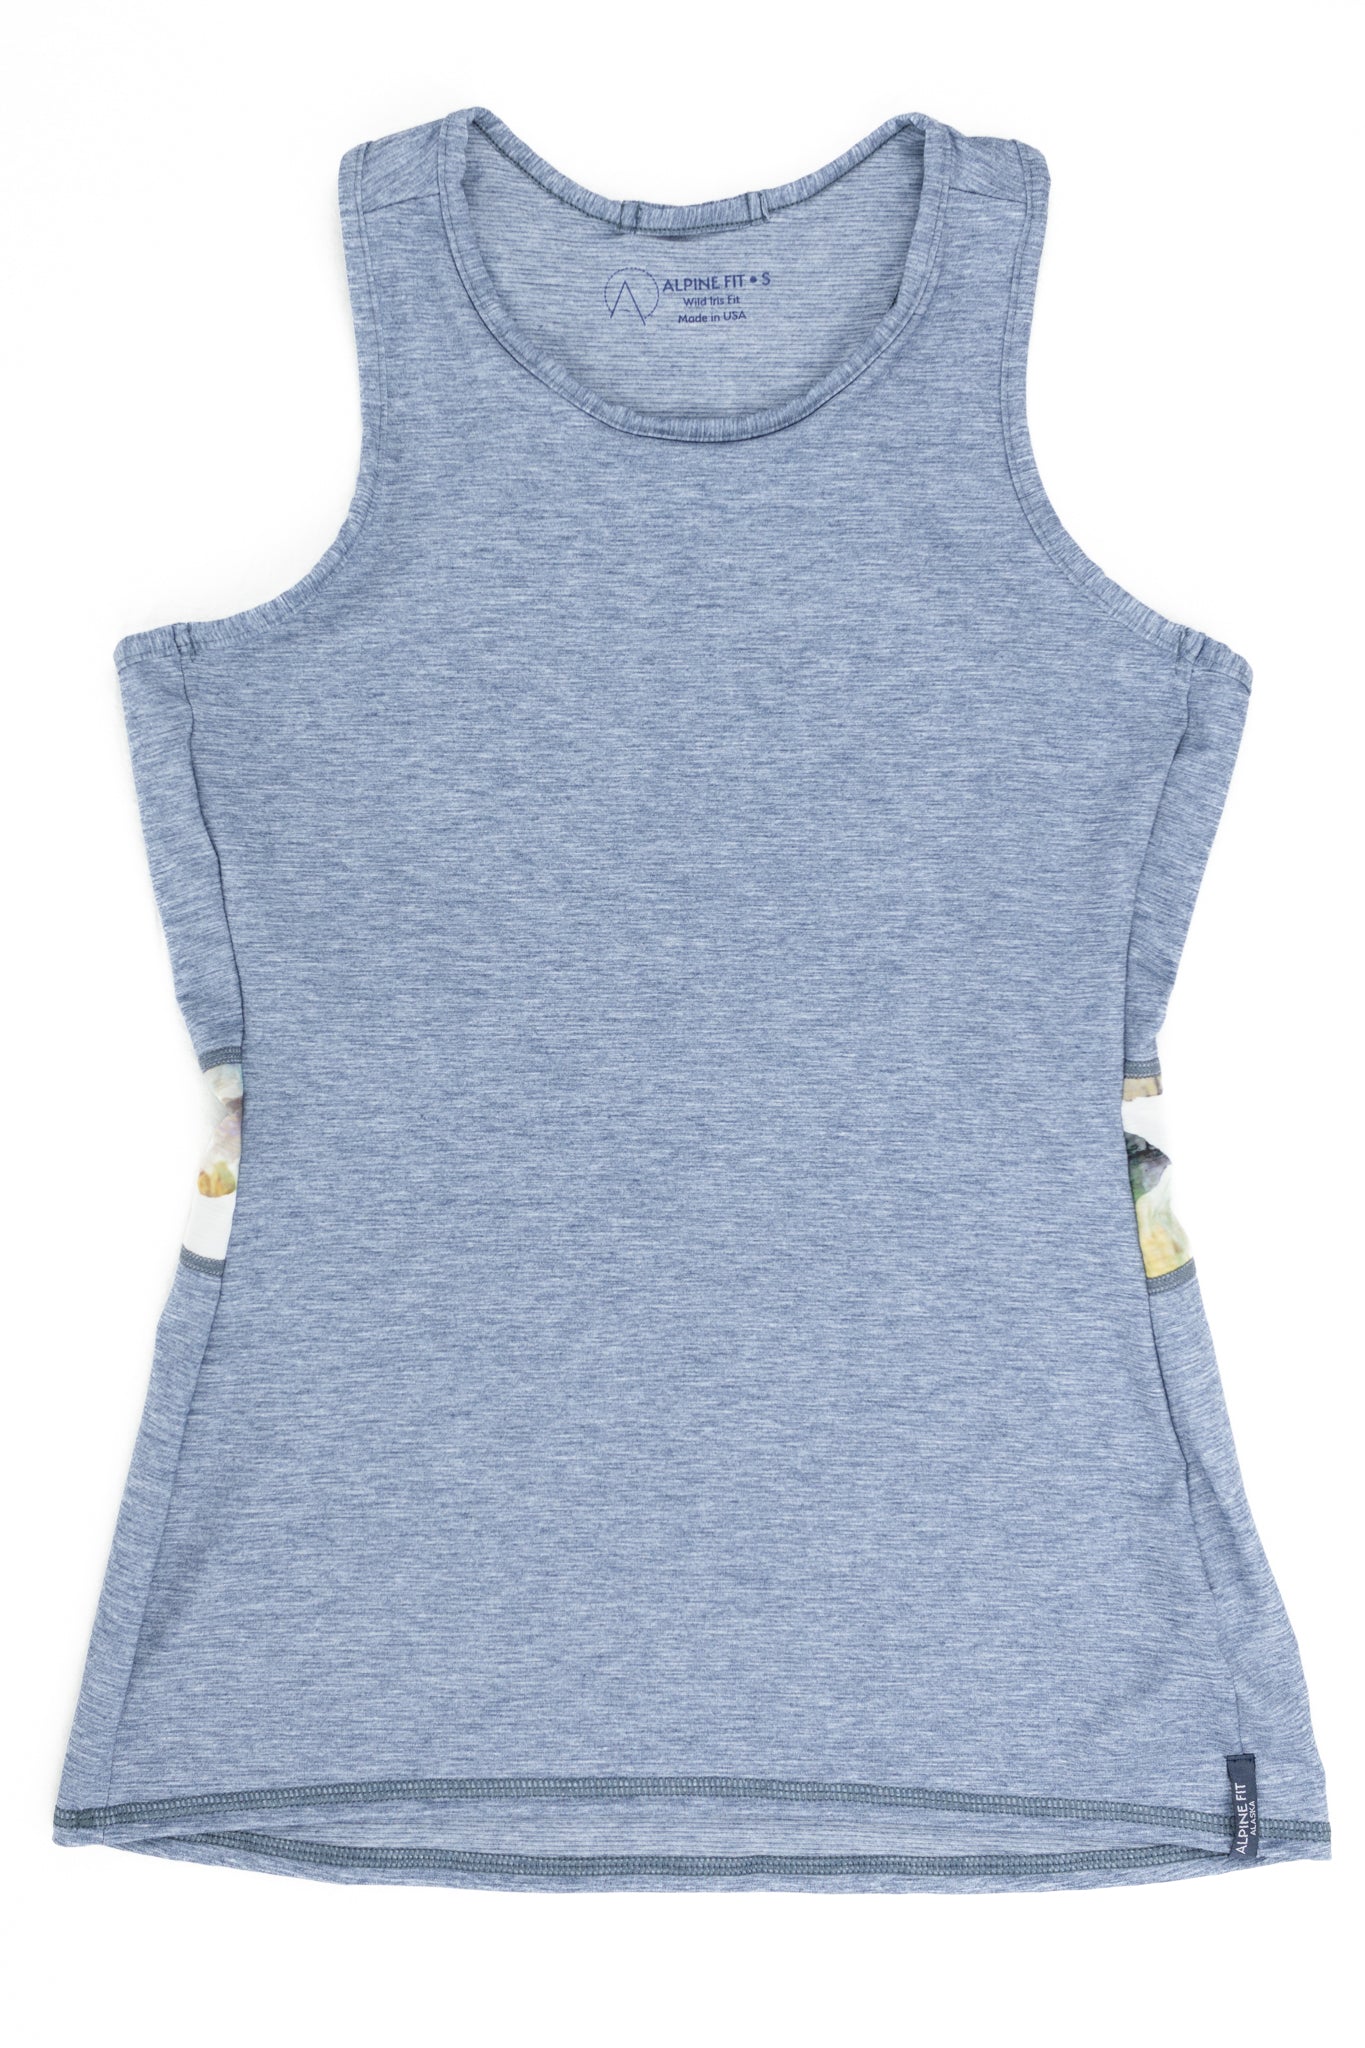 alpine fit tank top blue flat lay front